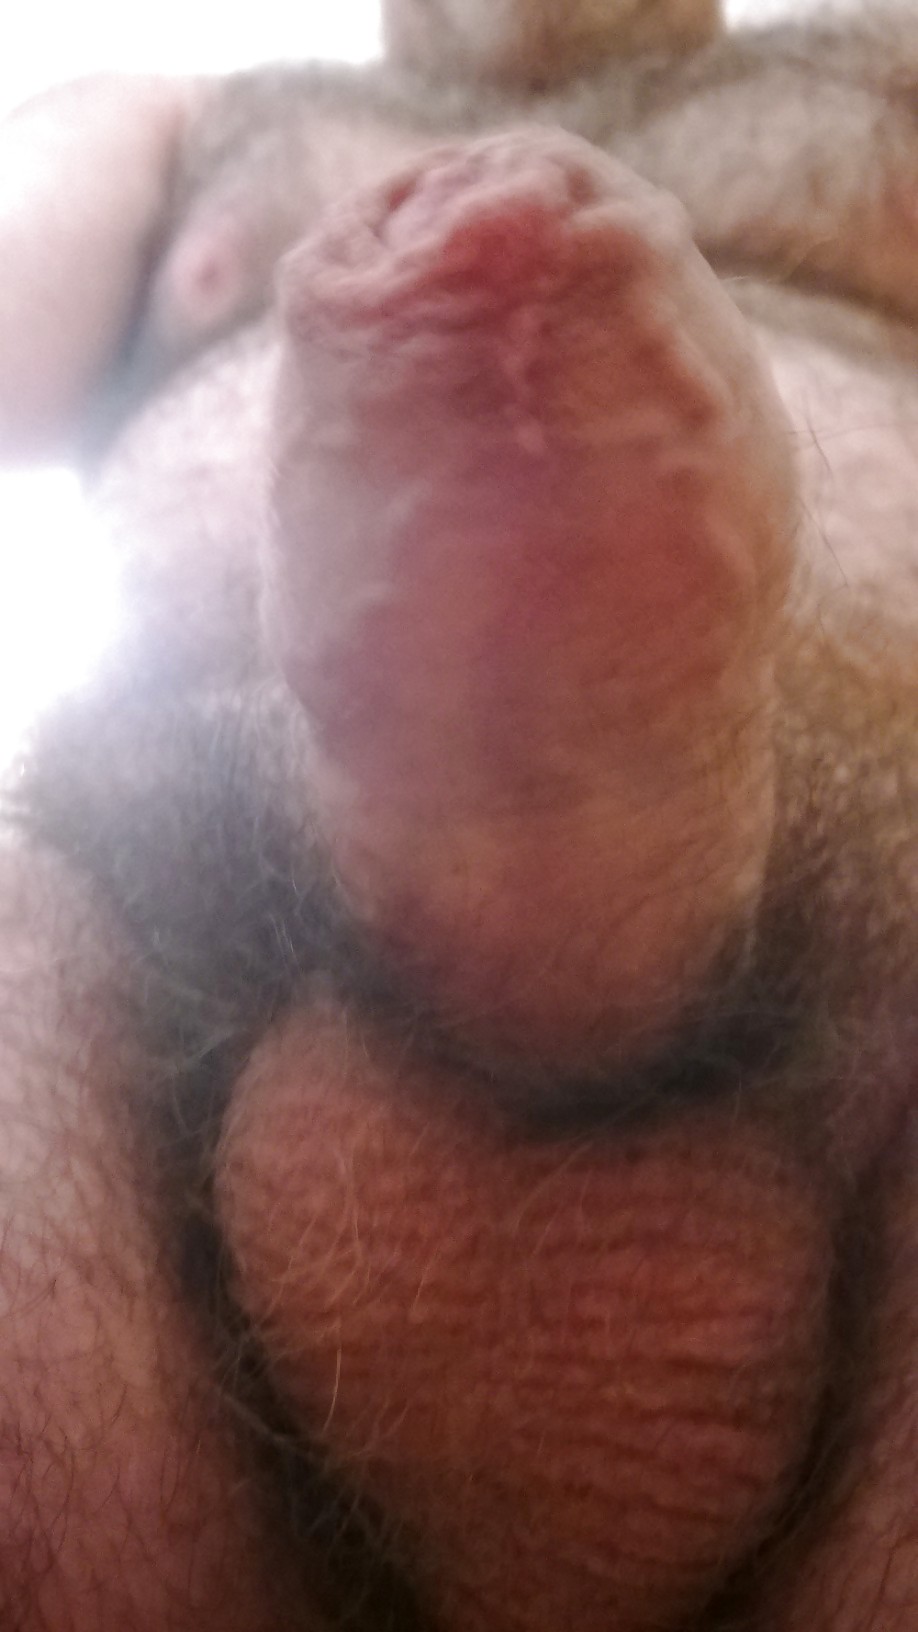 The cocksucker point of view (close up pics) porn pictures